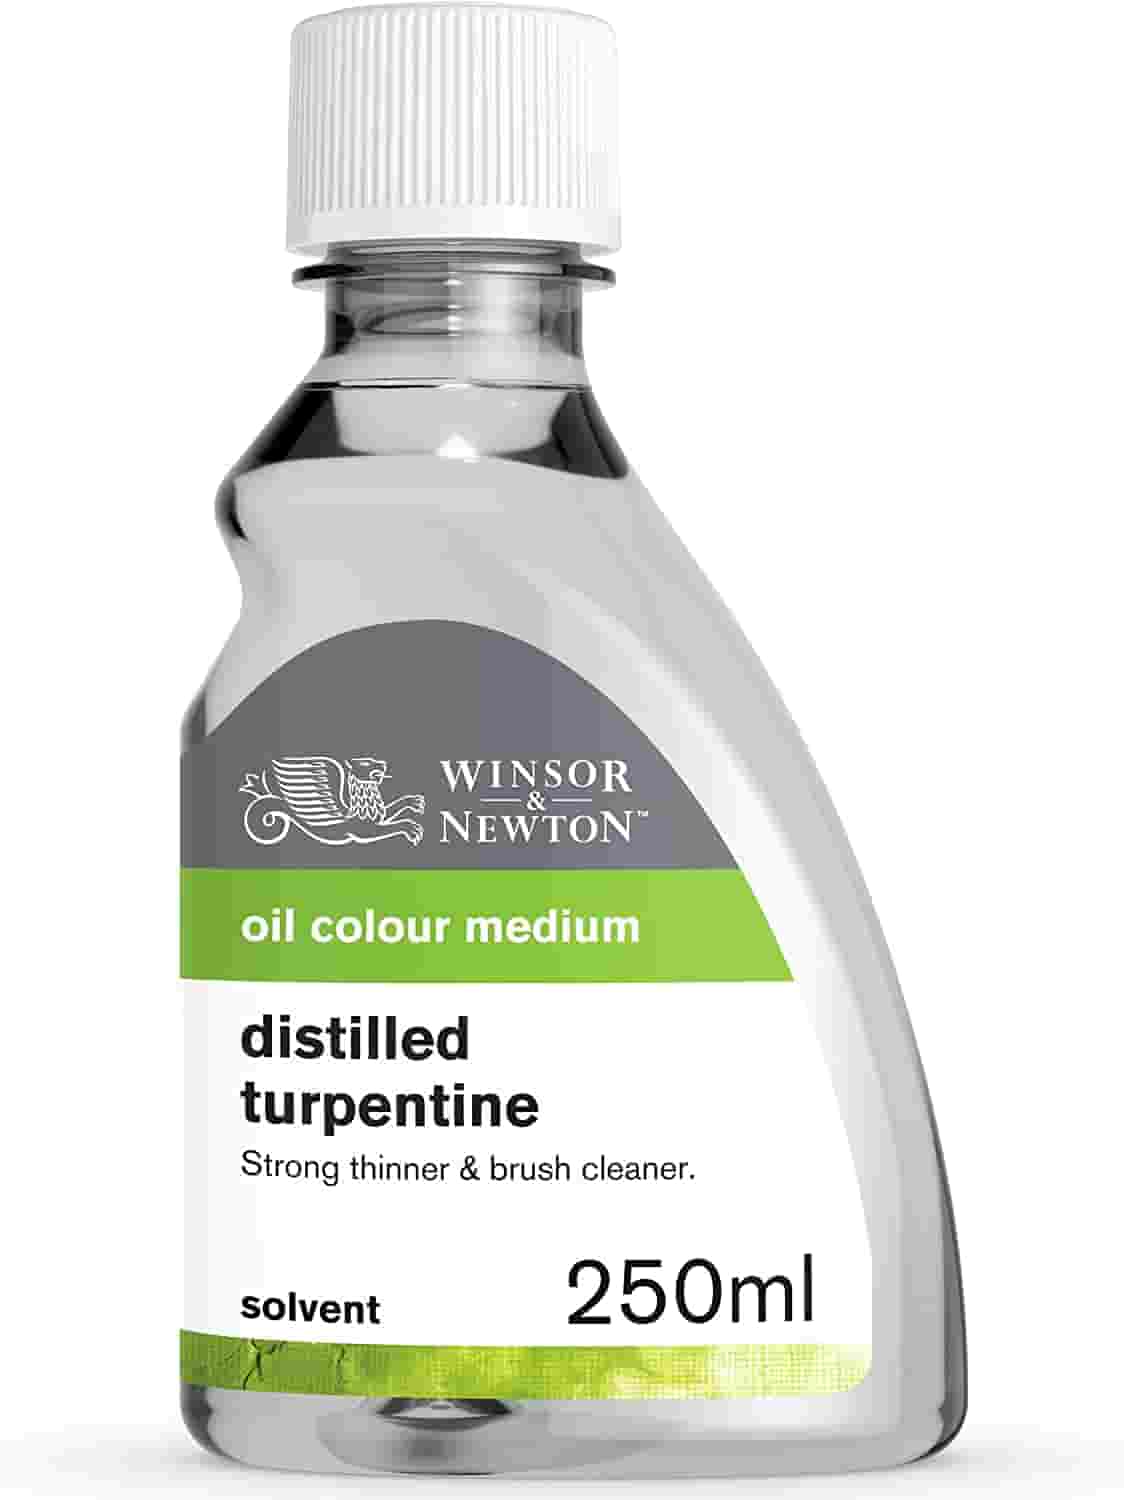 Winsor & Newton Distilled Turpentine, 250ml - How to remove yellowed varnish from oil painting